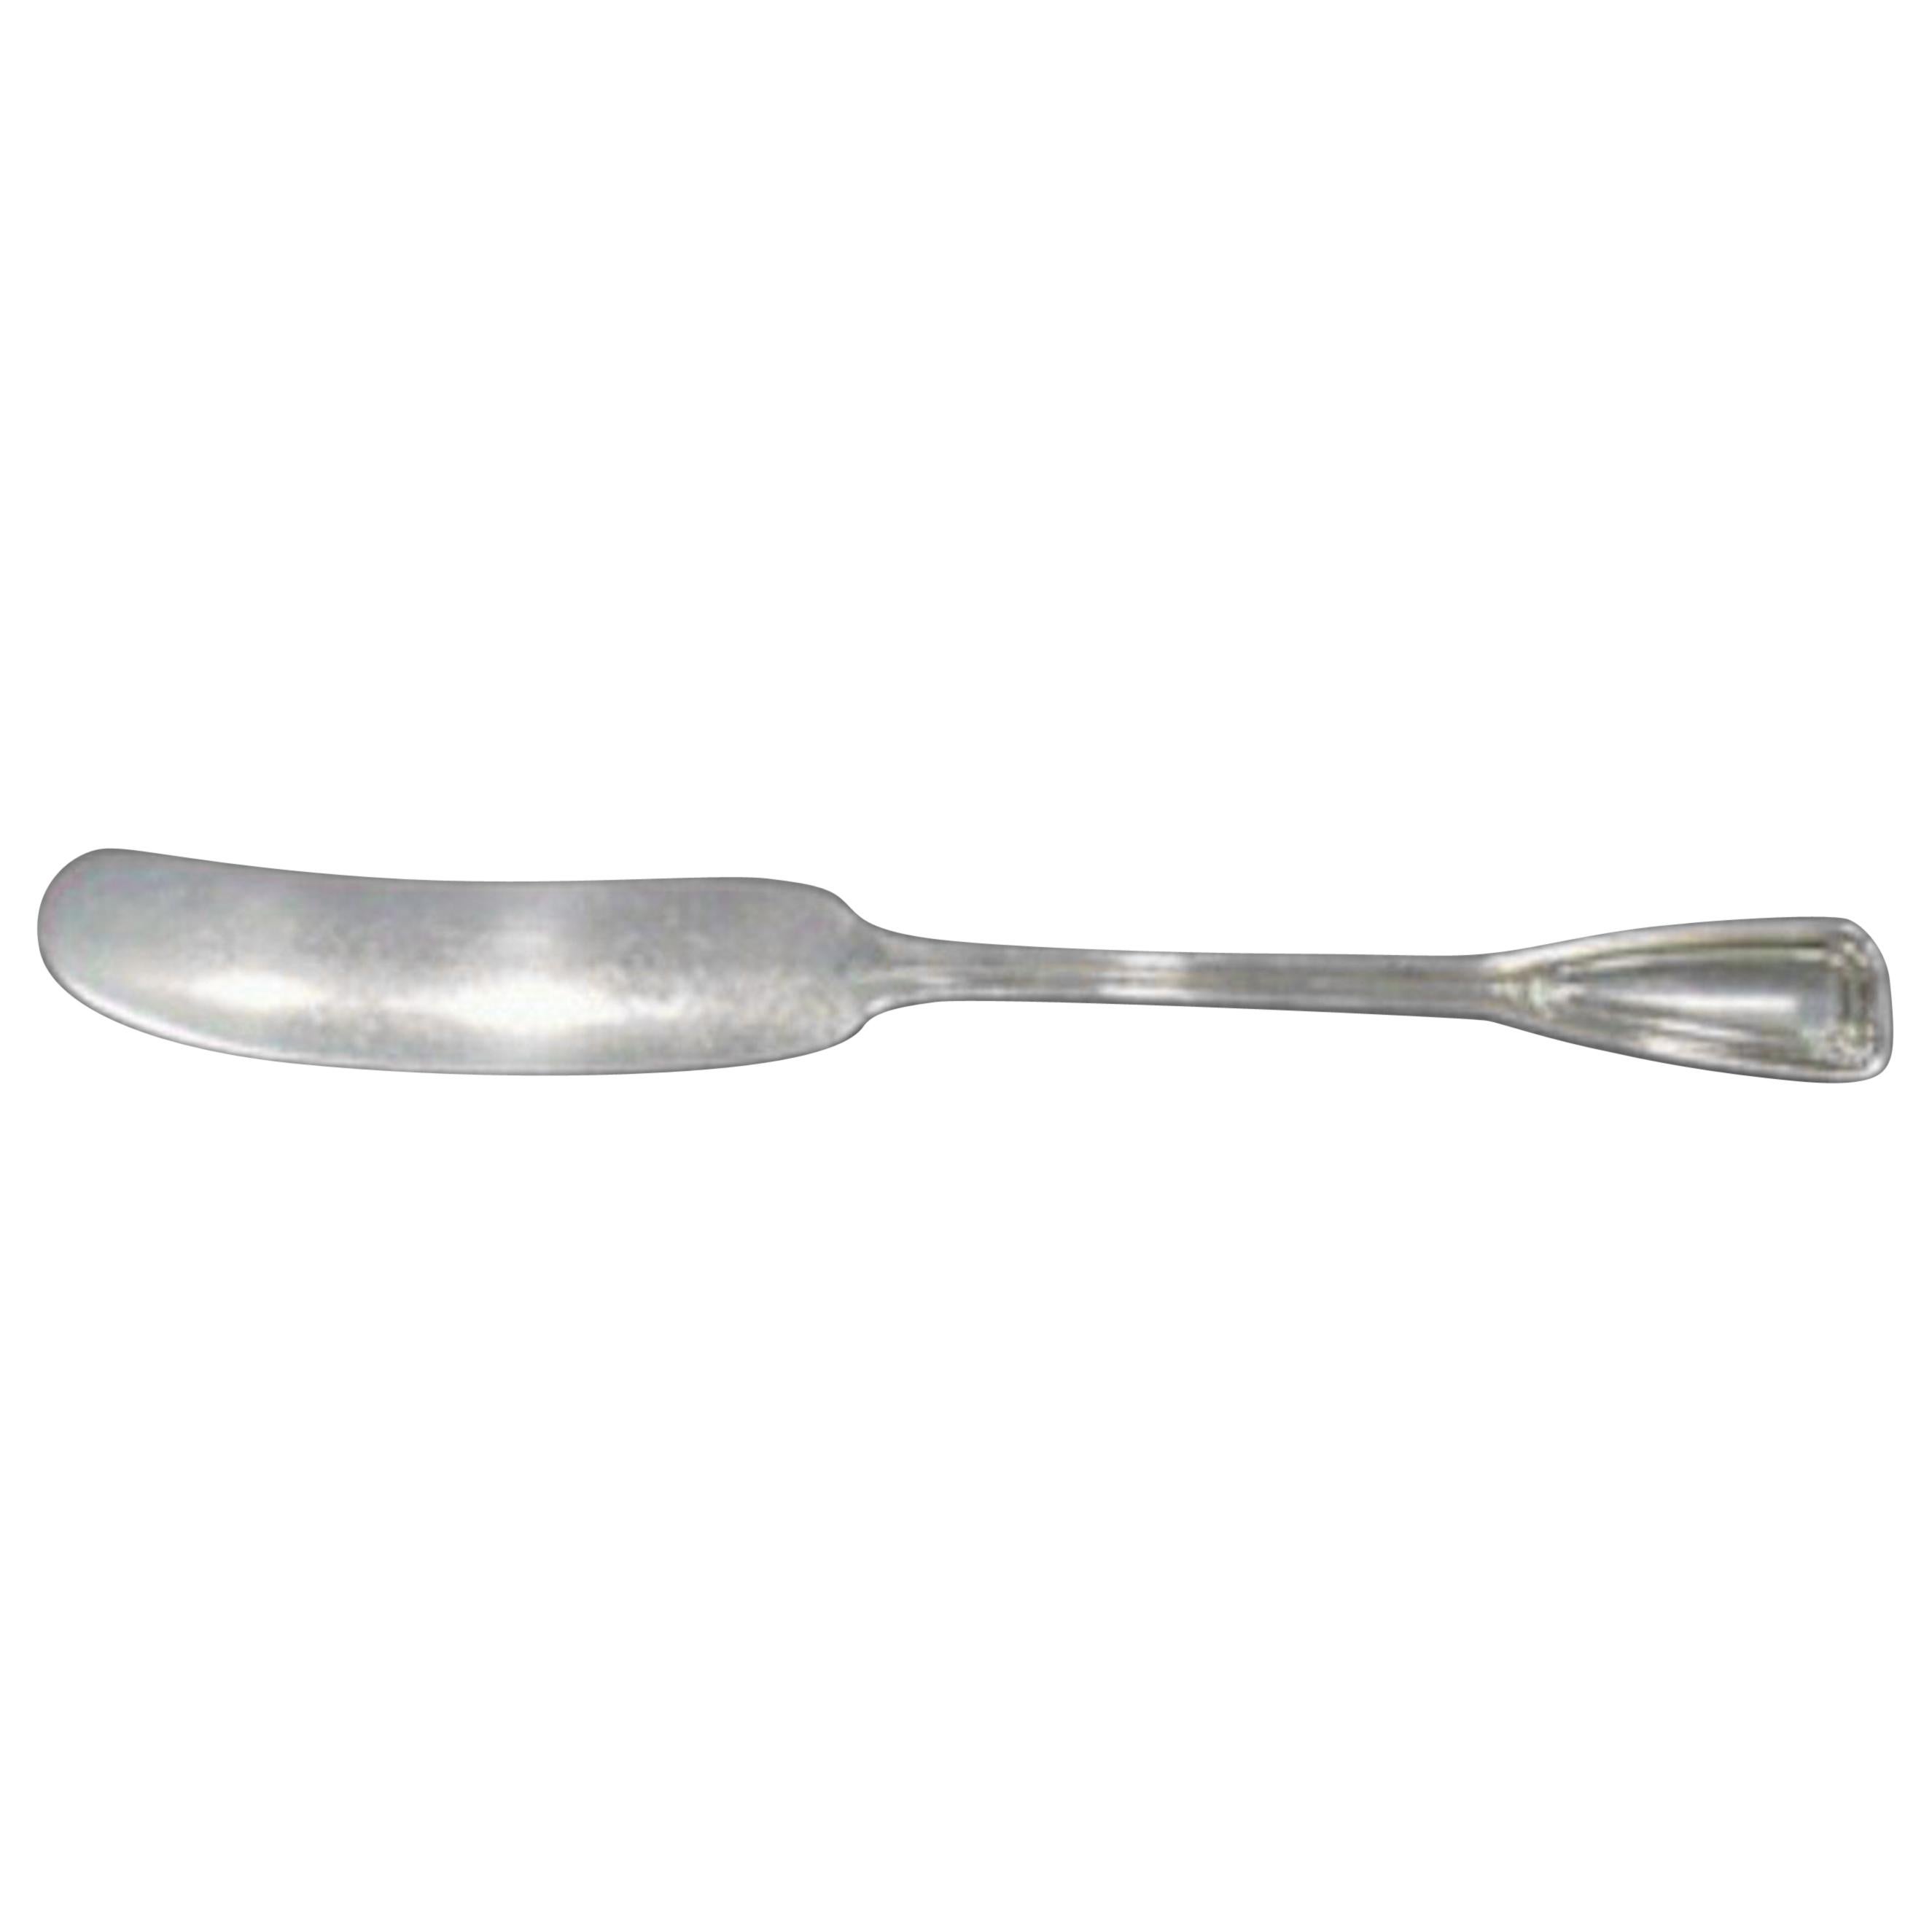 Saint Dunstan by Tiffany and Co Sterling Silver Butter Spreader Flat Handle